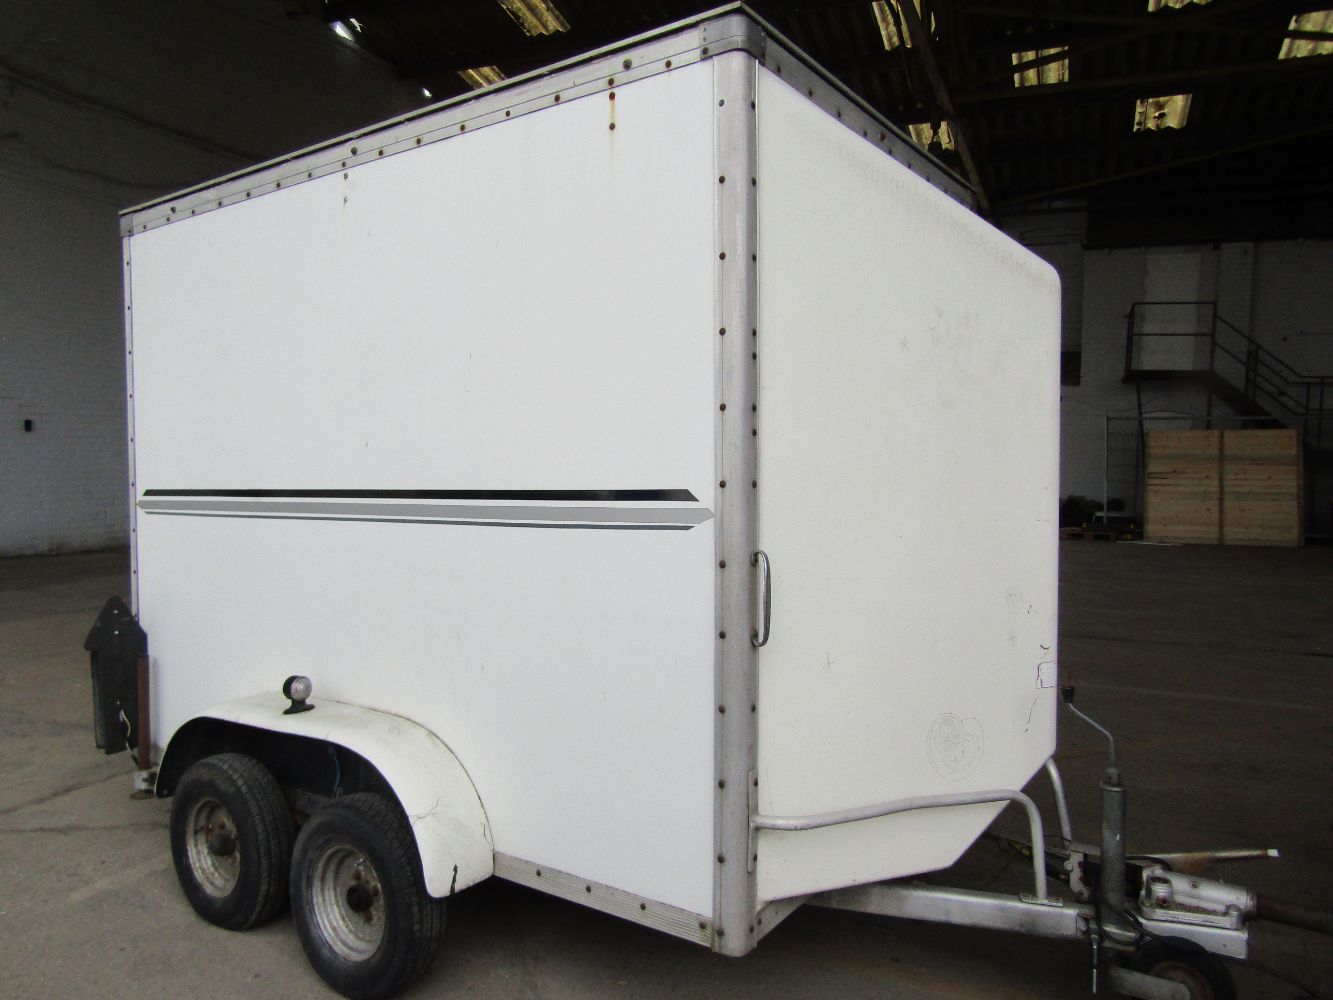 Twin Wheel Axle Trailer & Camping accessories such as torches, log burner mesh stands, Awnings and more